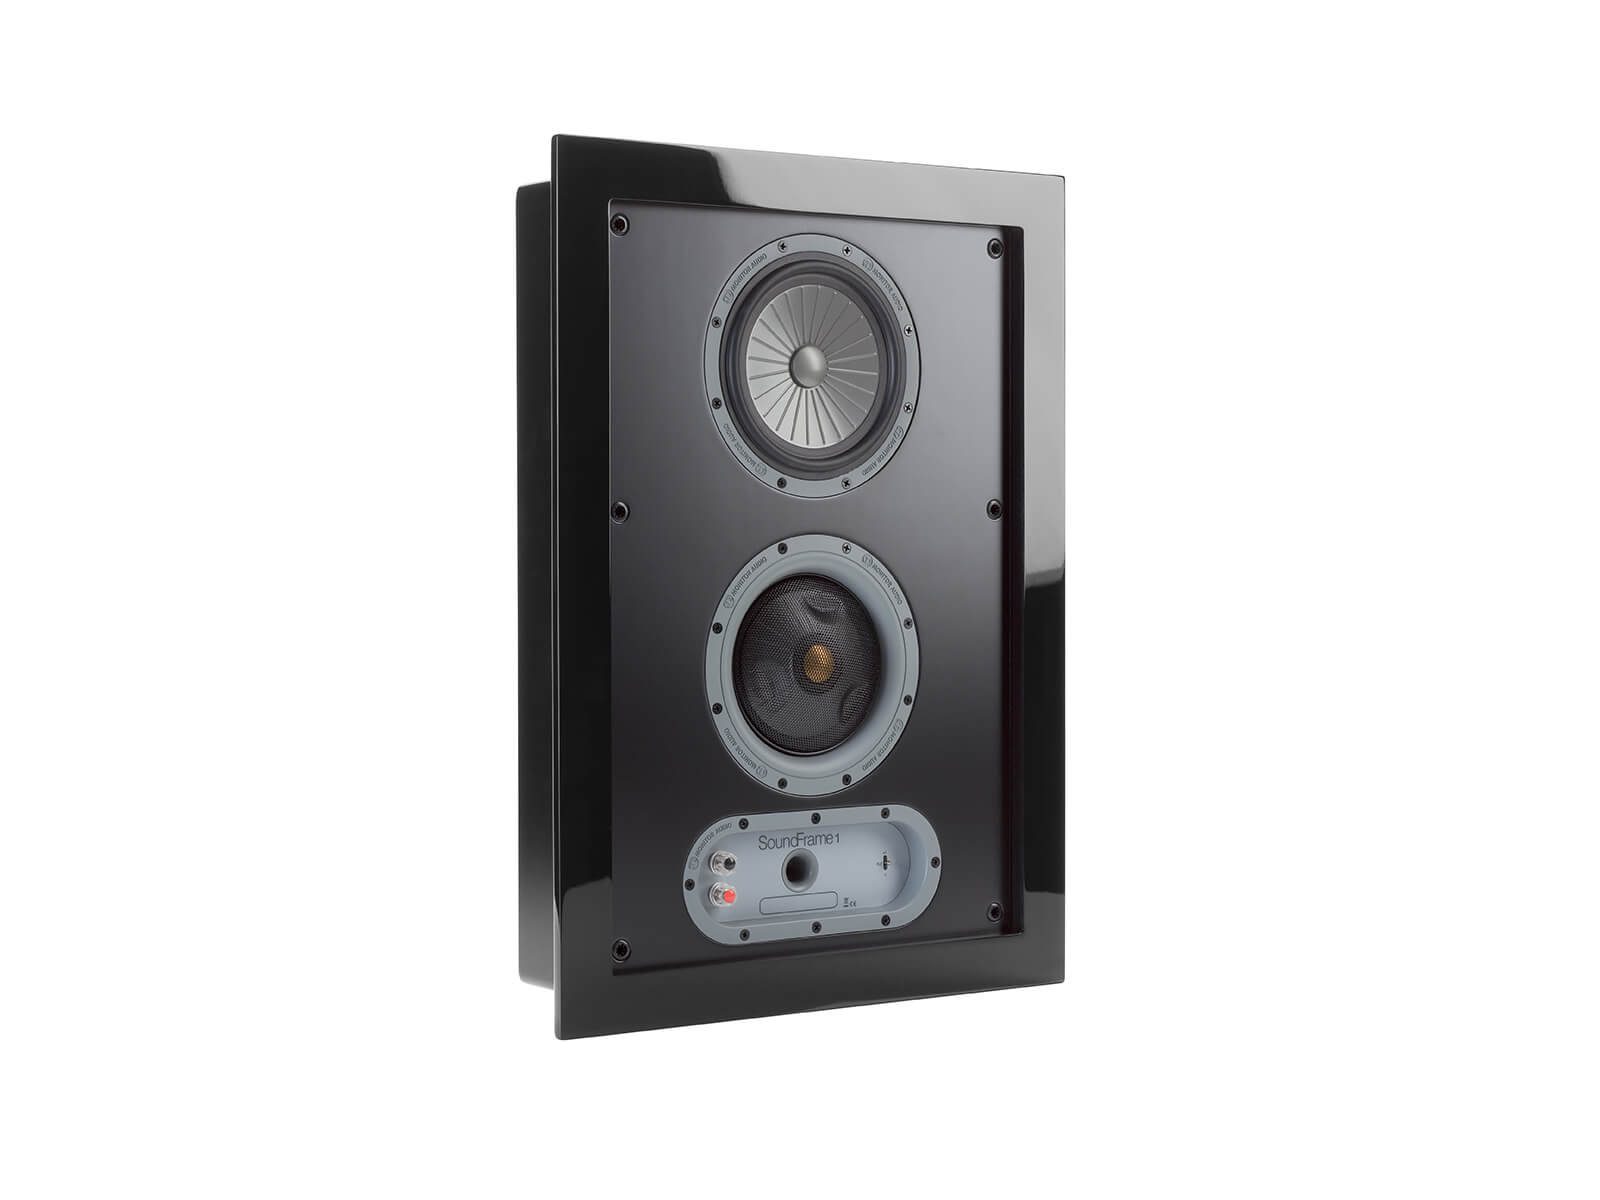 SoundFrame SF1, on-wall speakers, grille-less, with a high gloss black lacquer finish.